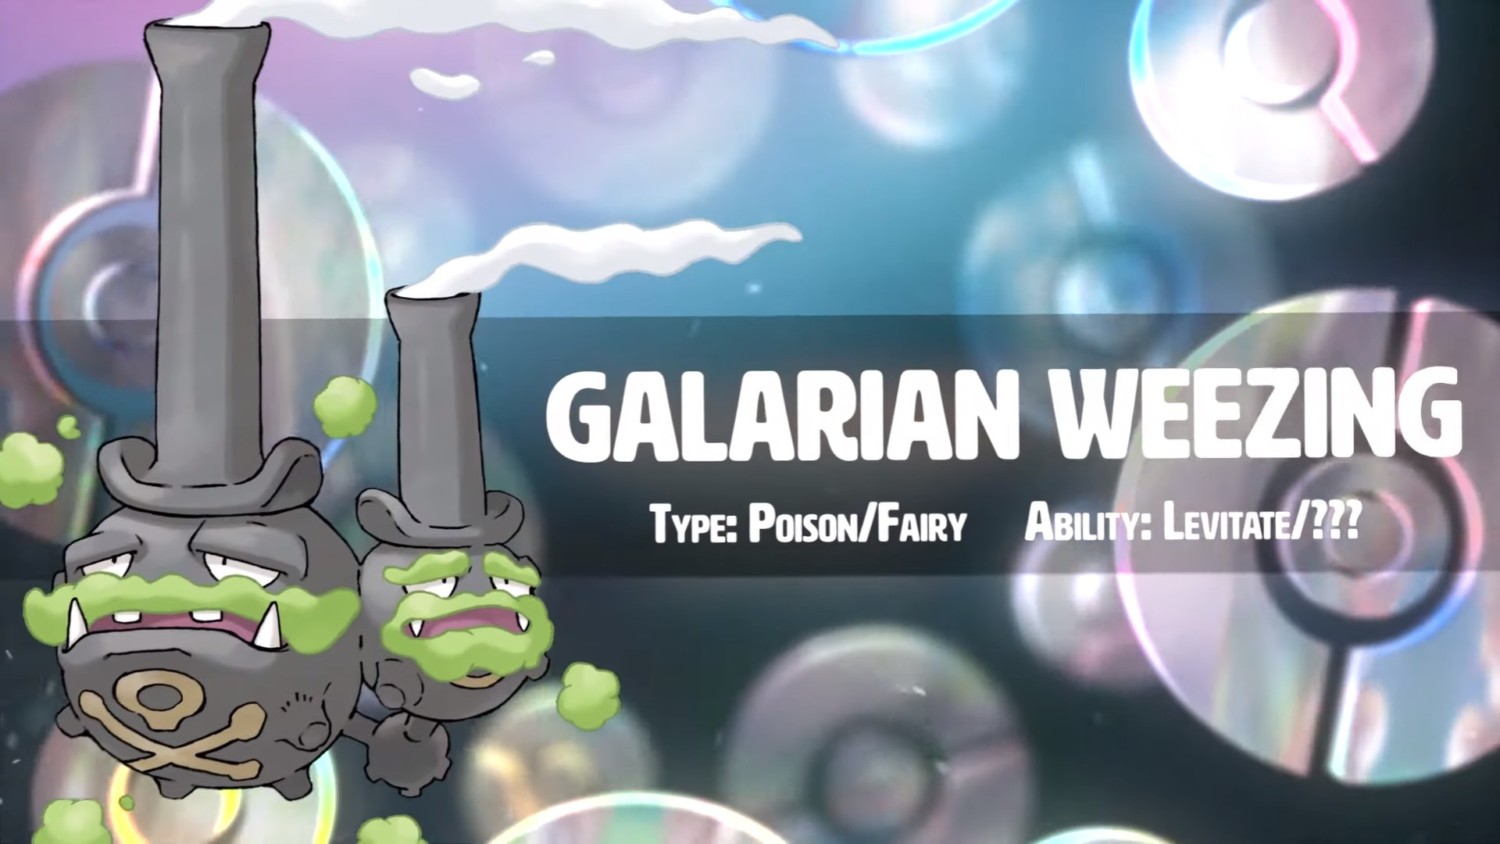 Galarian Ponyta is exclusive to Pokemon Shield, ability detailed